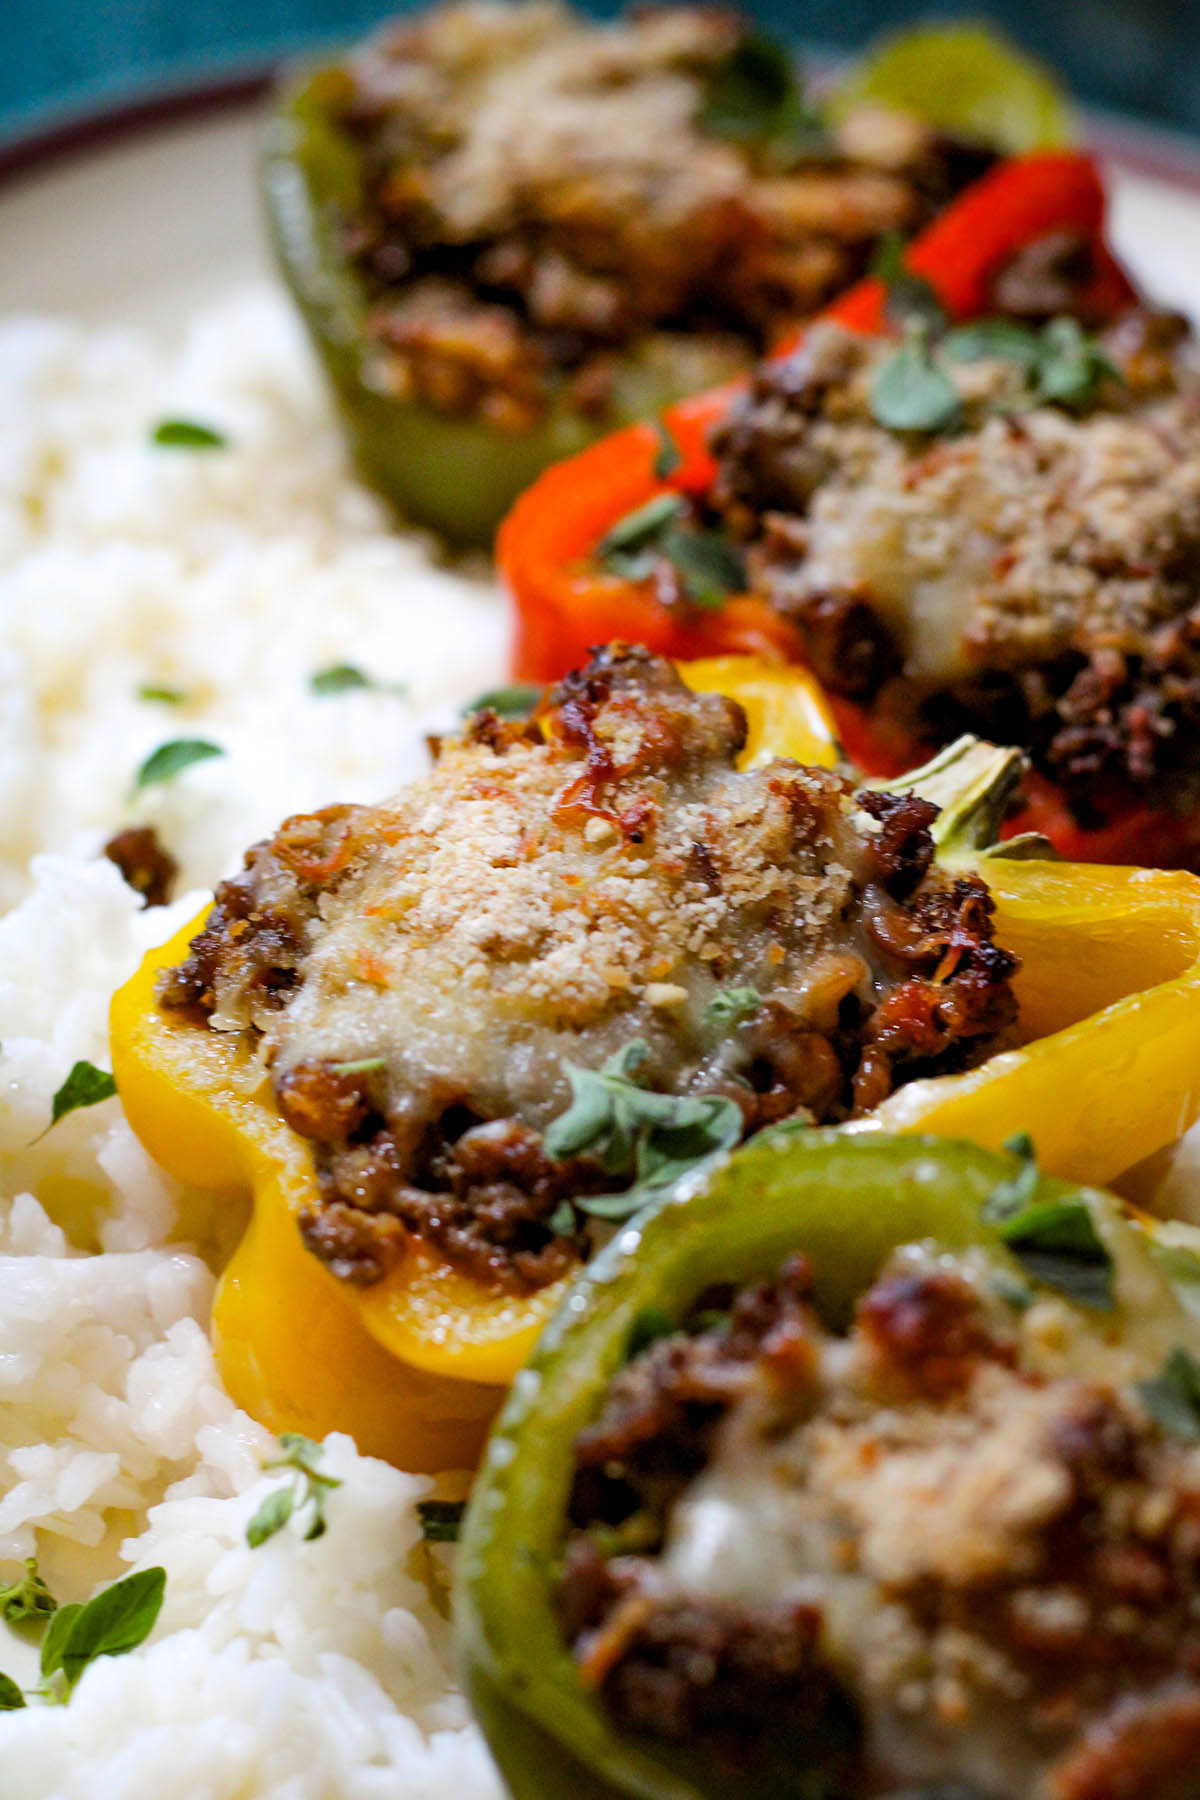 4 stuffed peppers over white rice with different color bell peppers.